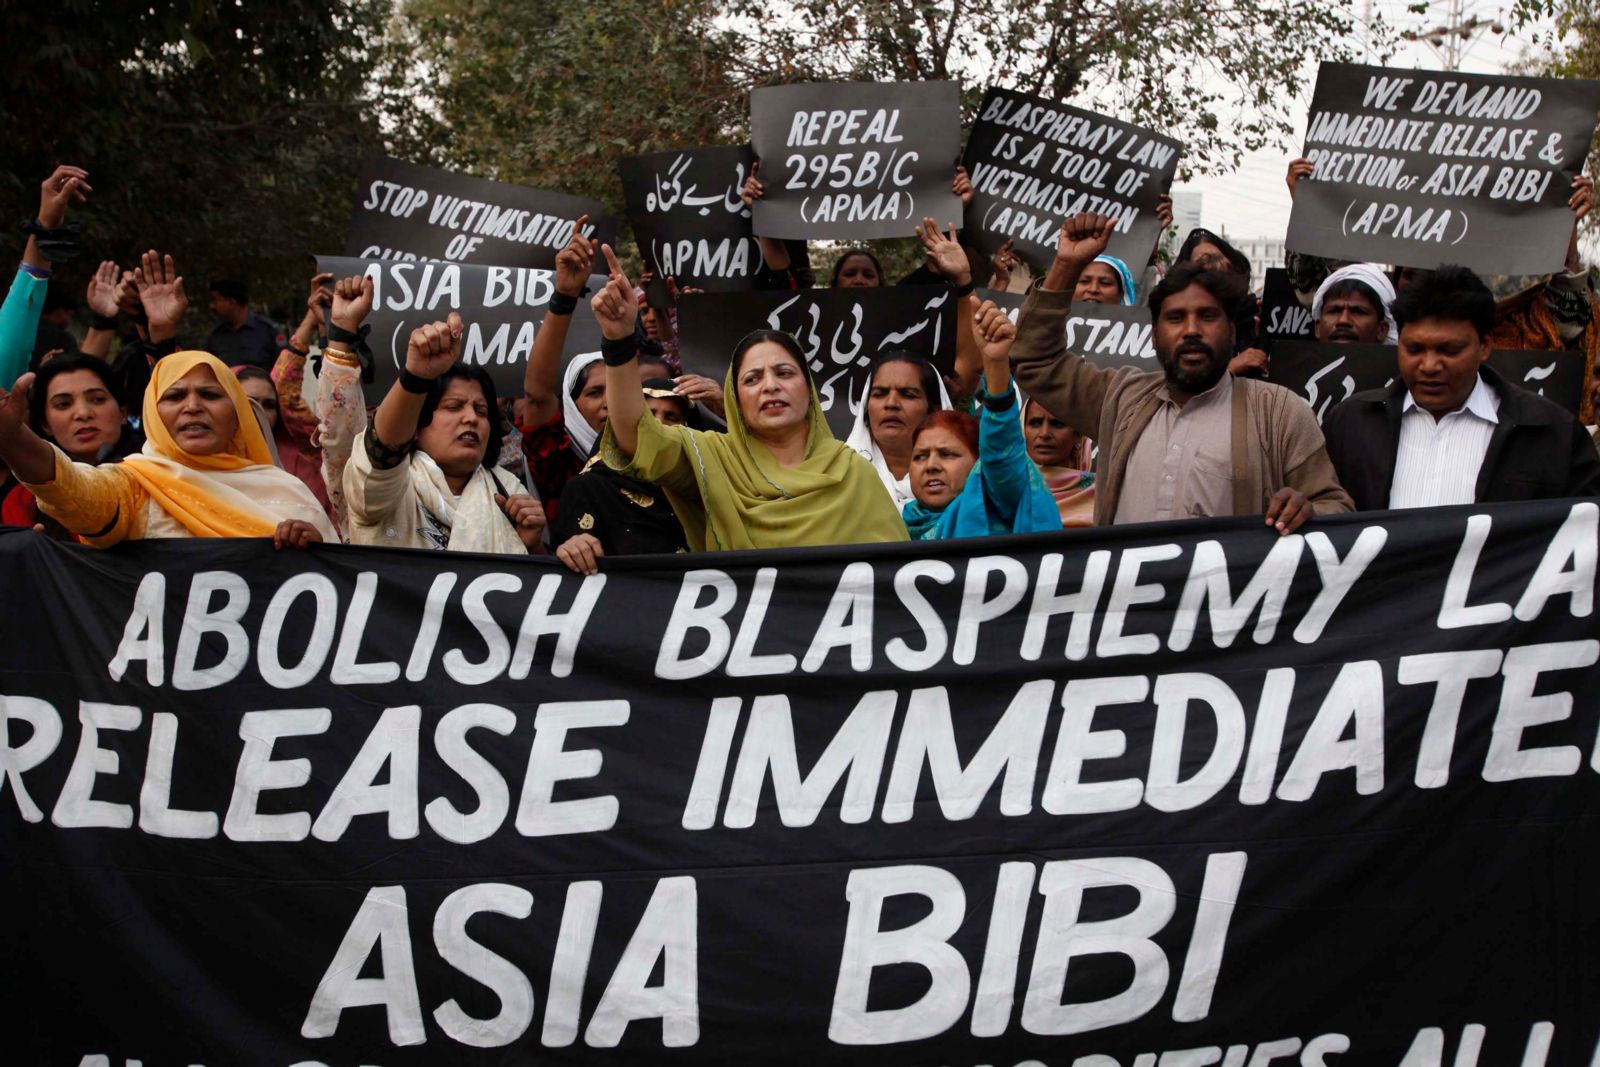 Blasphemy laws and human rights: a match made in hell